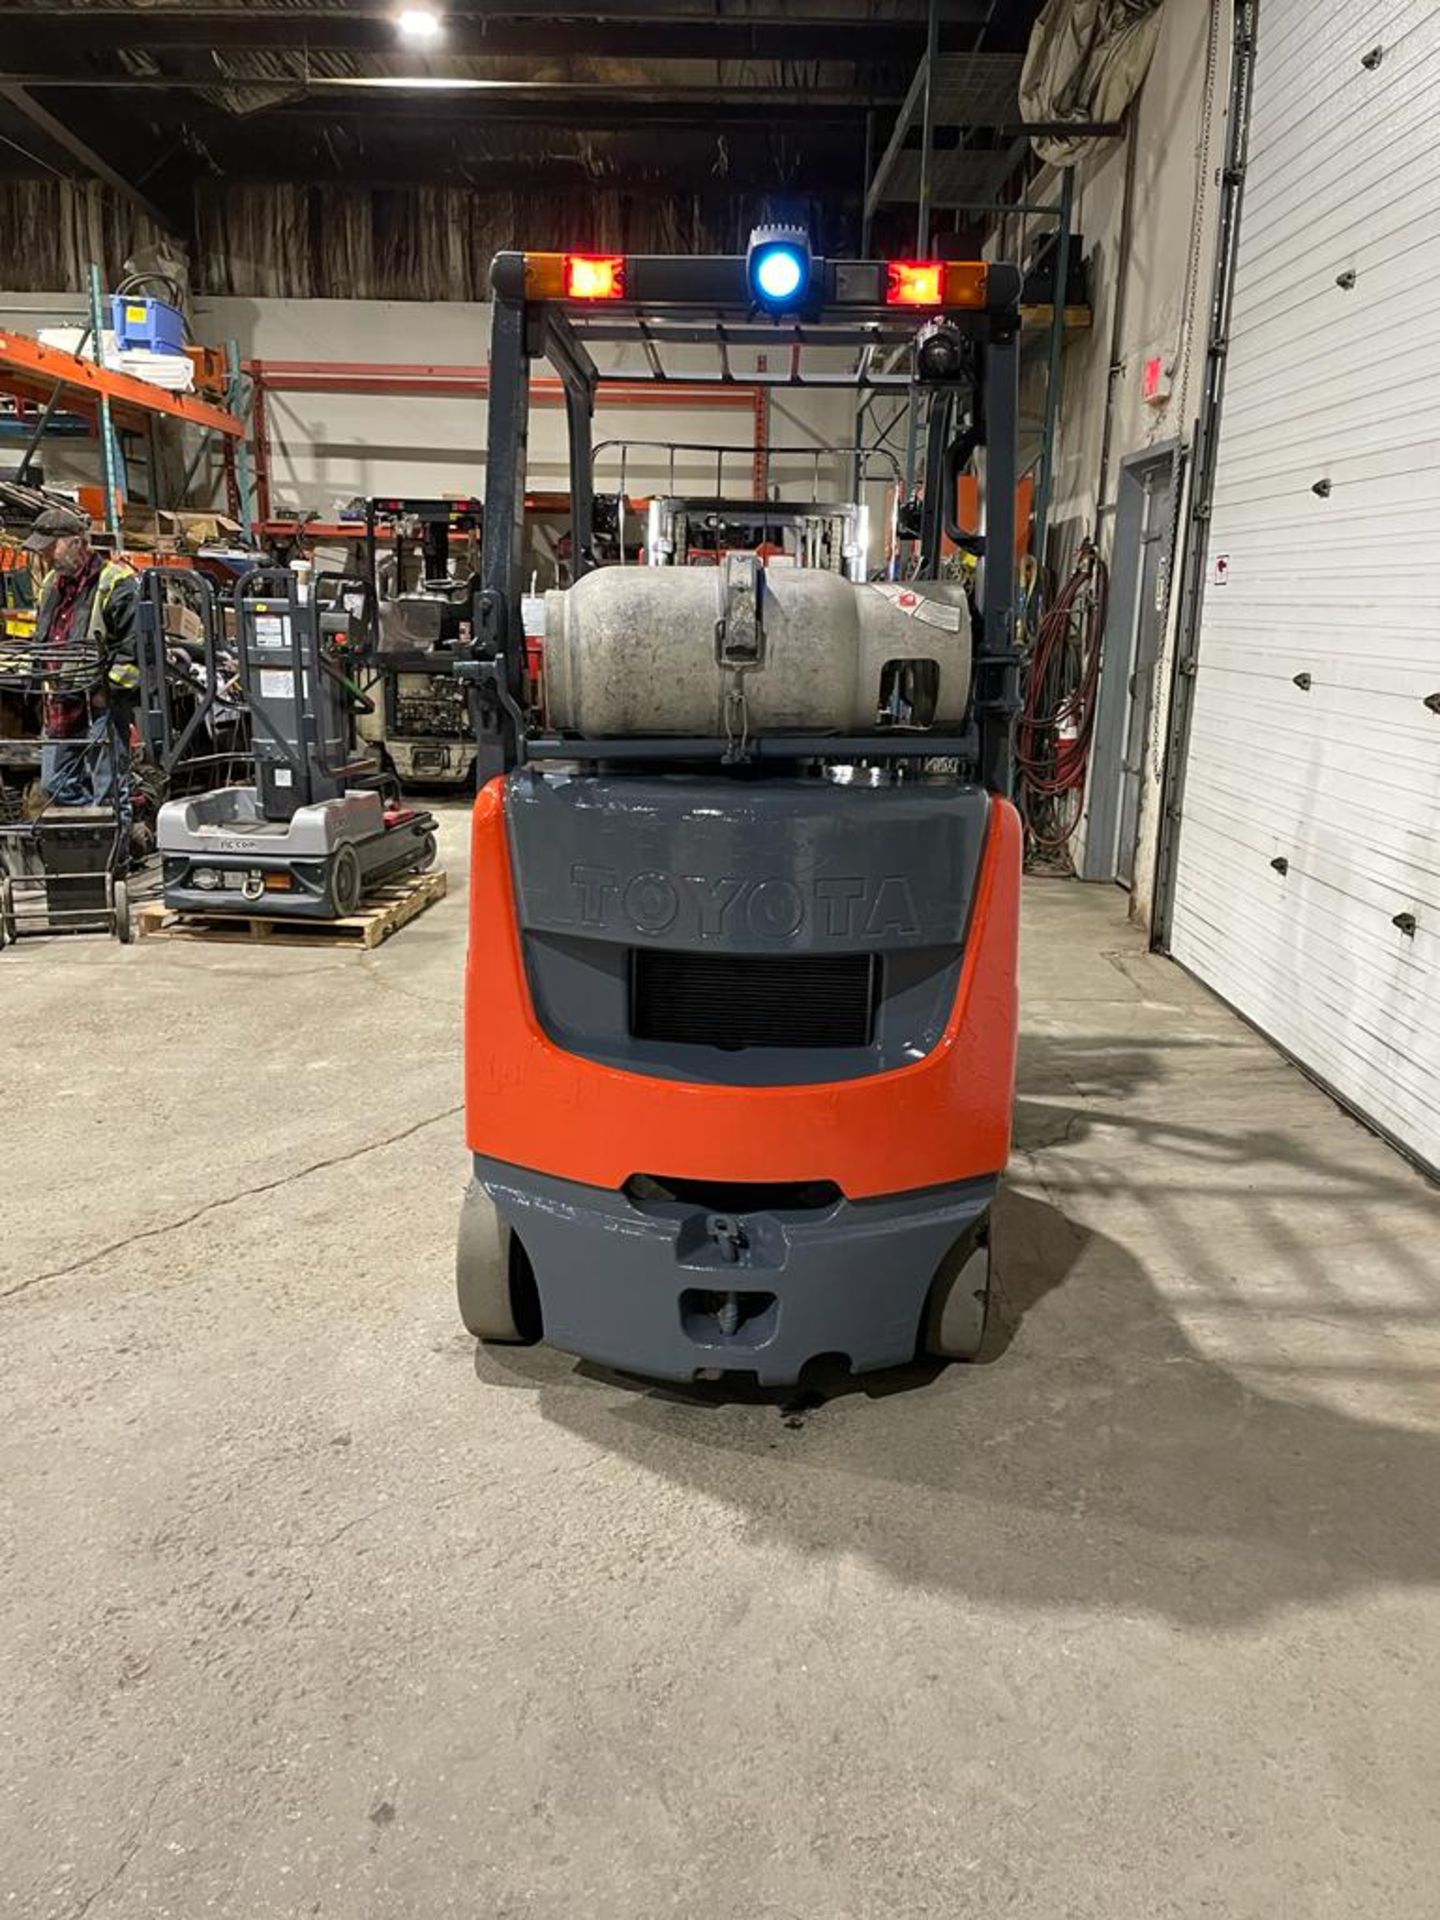 NICE 2019 Toyota 4,000lbs Capacity Forklift LPG (propane) with sideshift (no propane tank included) - Image 2 of 3